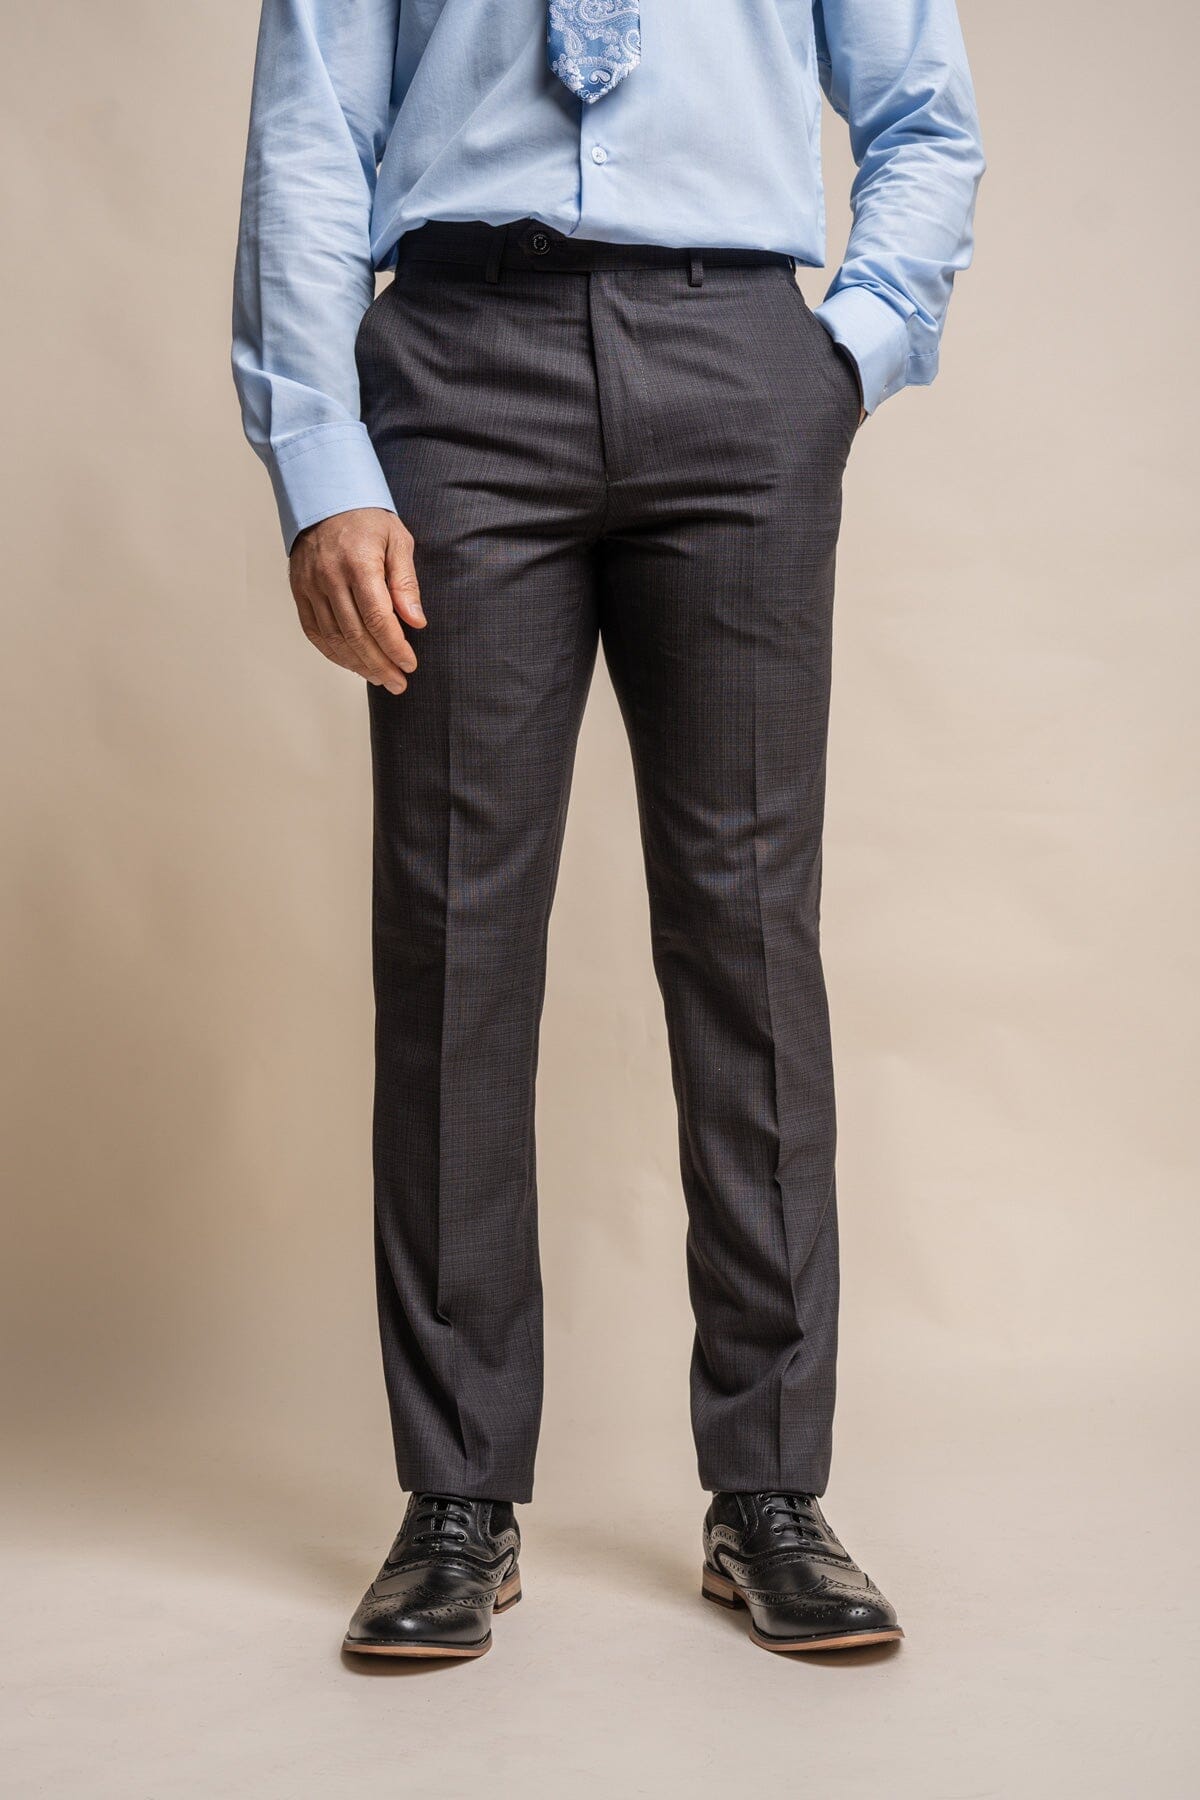 Graphite Check Trousers - STOCK CLEARANCE - Trousers Sale - 40R 